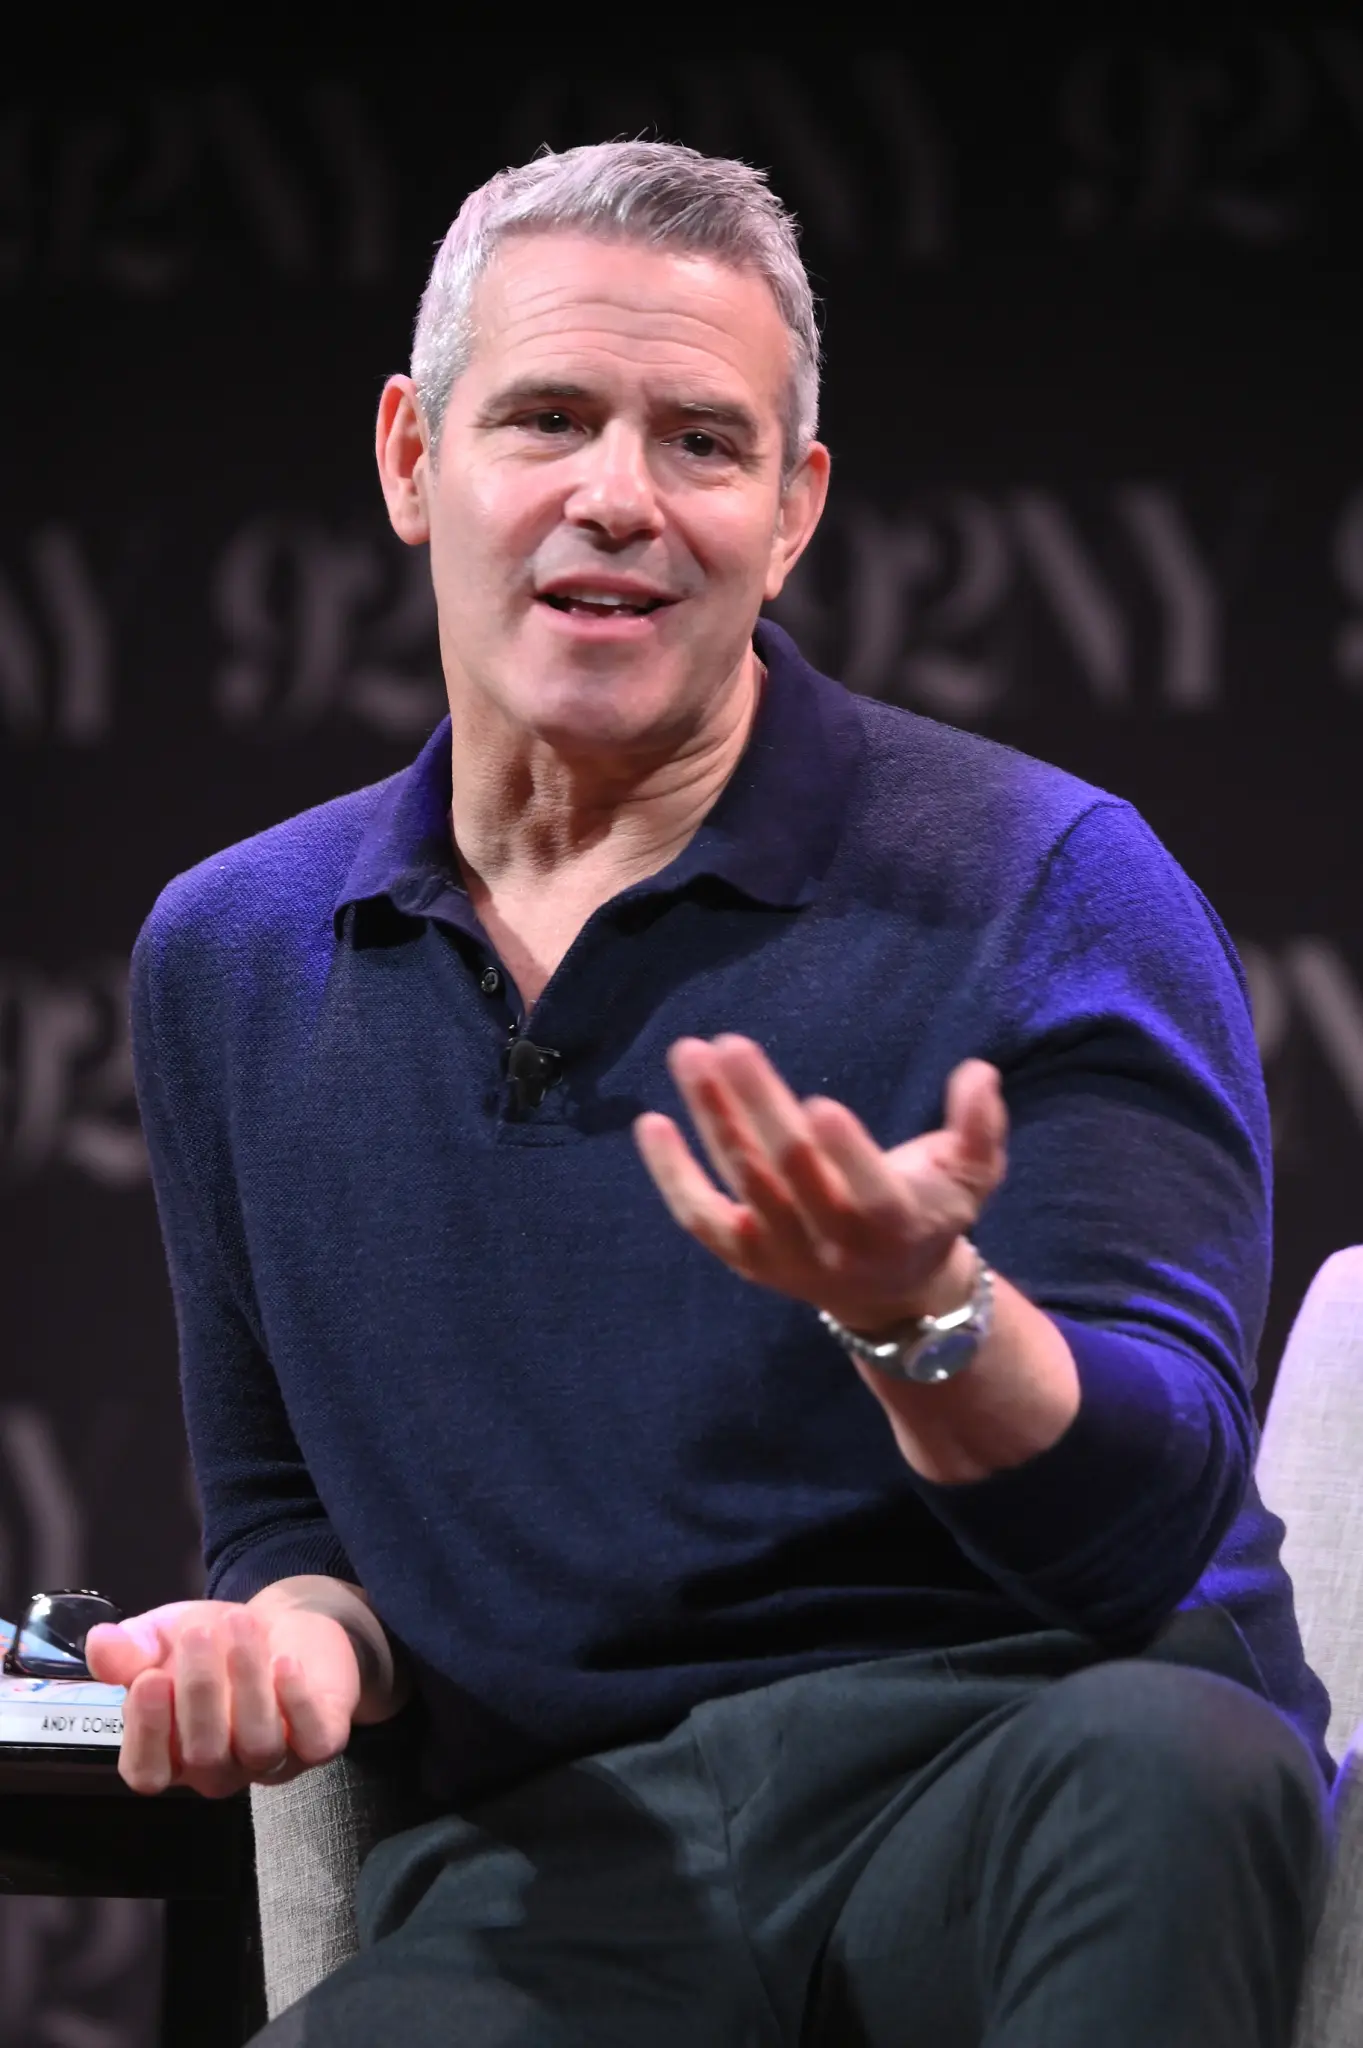 Explosive Allegations Shaken Off: Andy Cohen Cleared by Network Amid Serious Claims